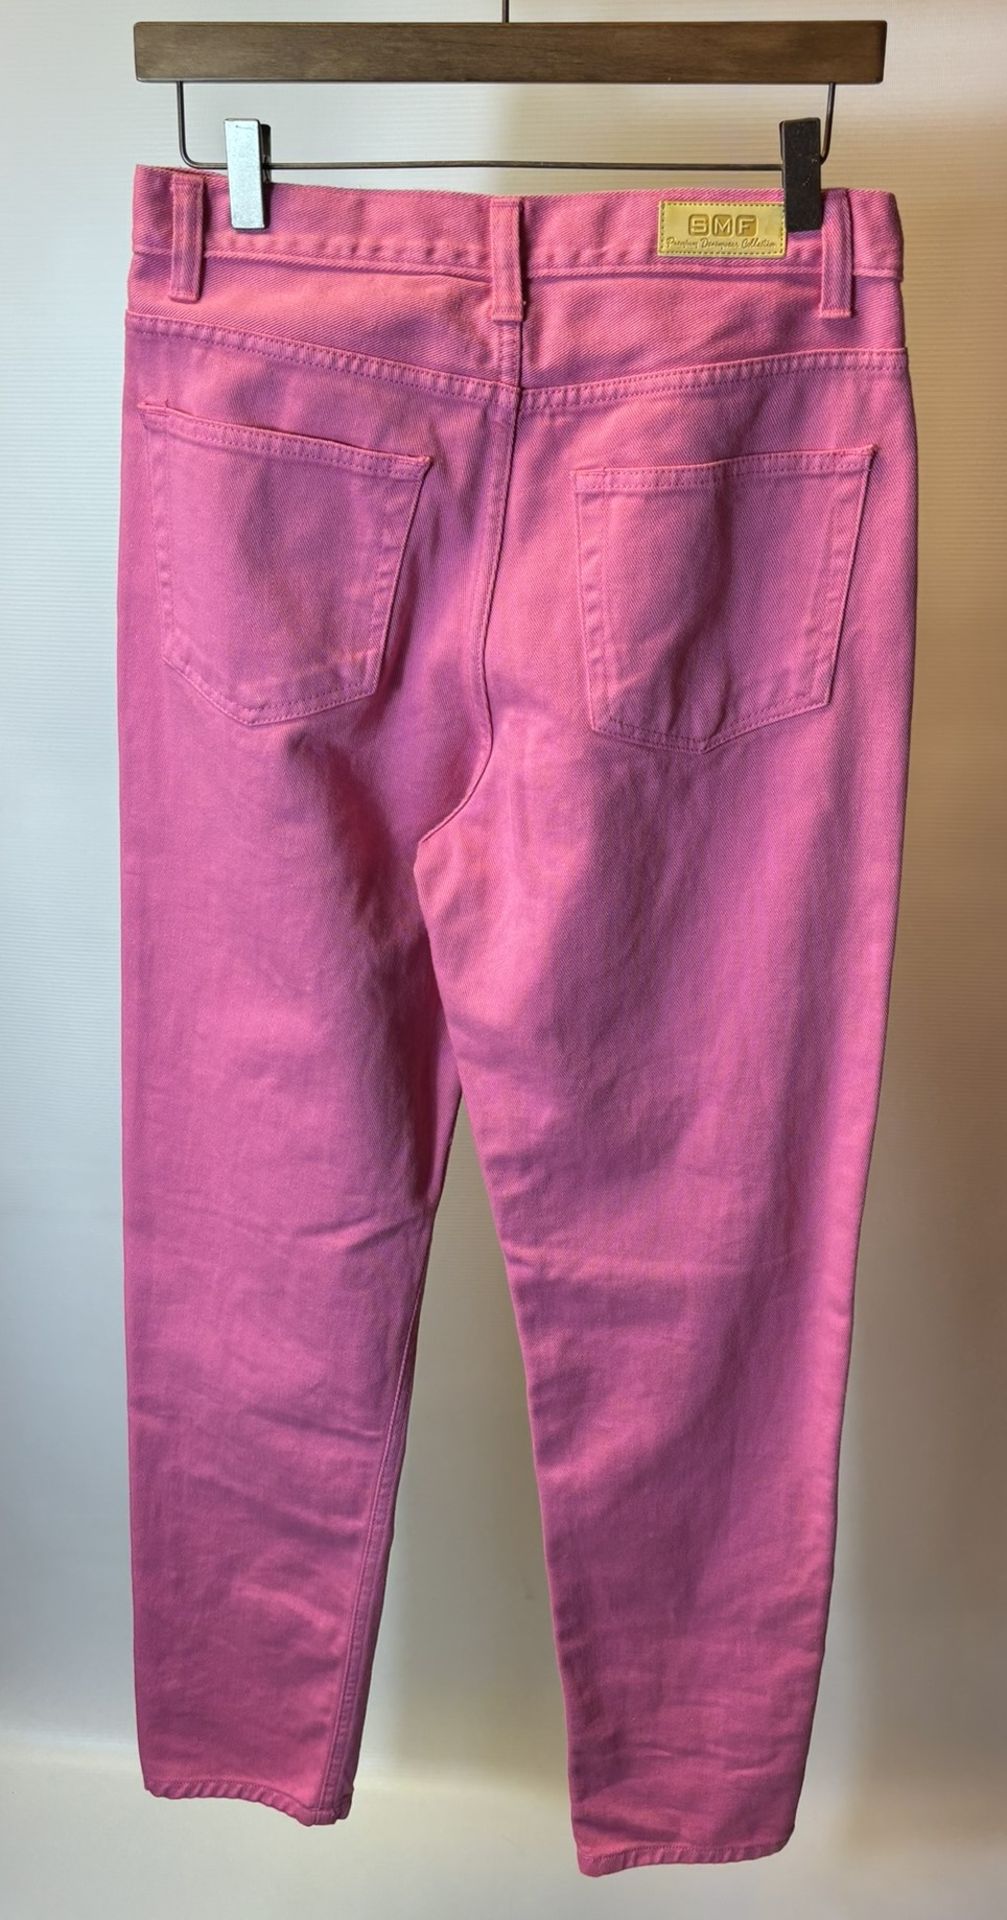 12 x Various Pairs Of Women's Trousers/Jeans As Seen In Photos - Image 35 of 36